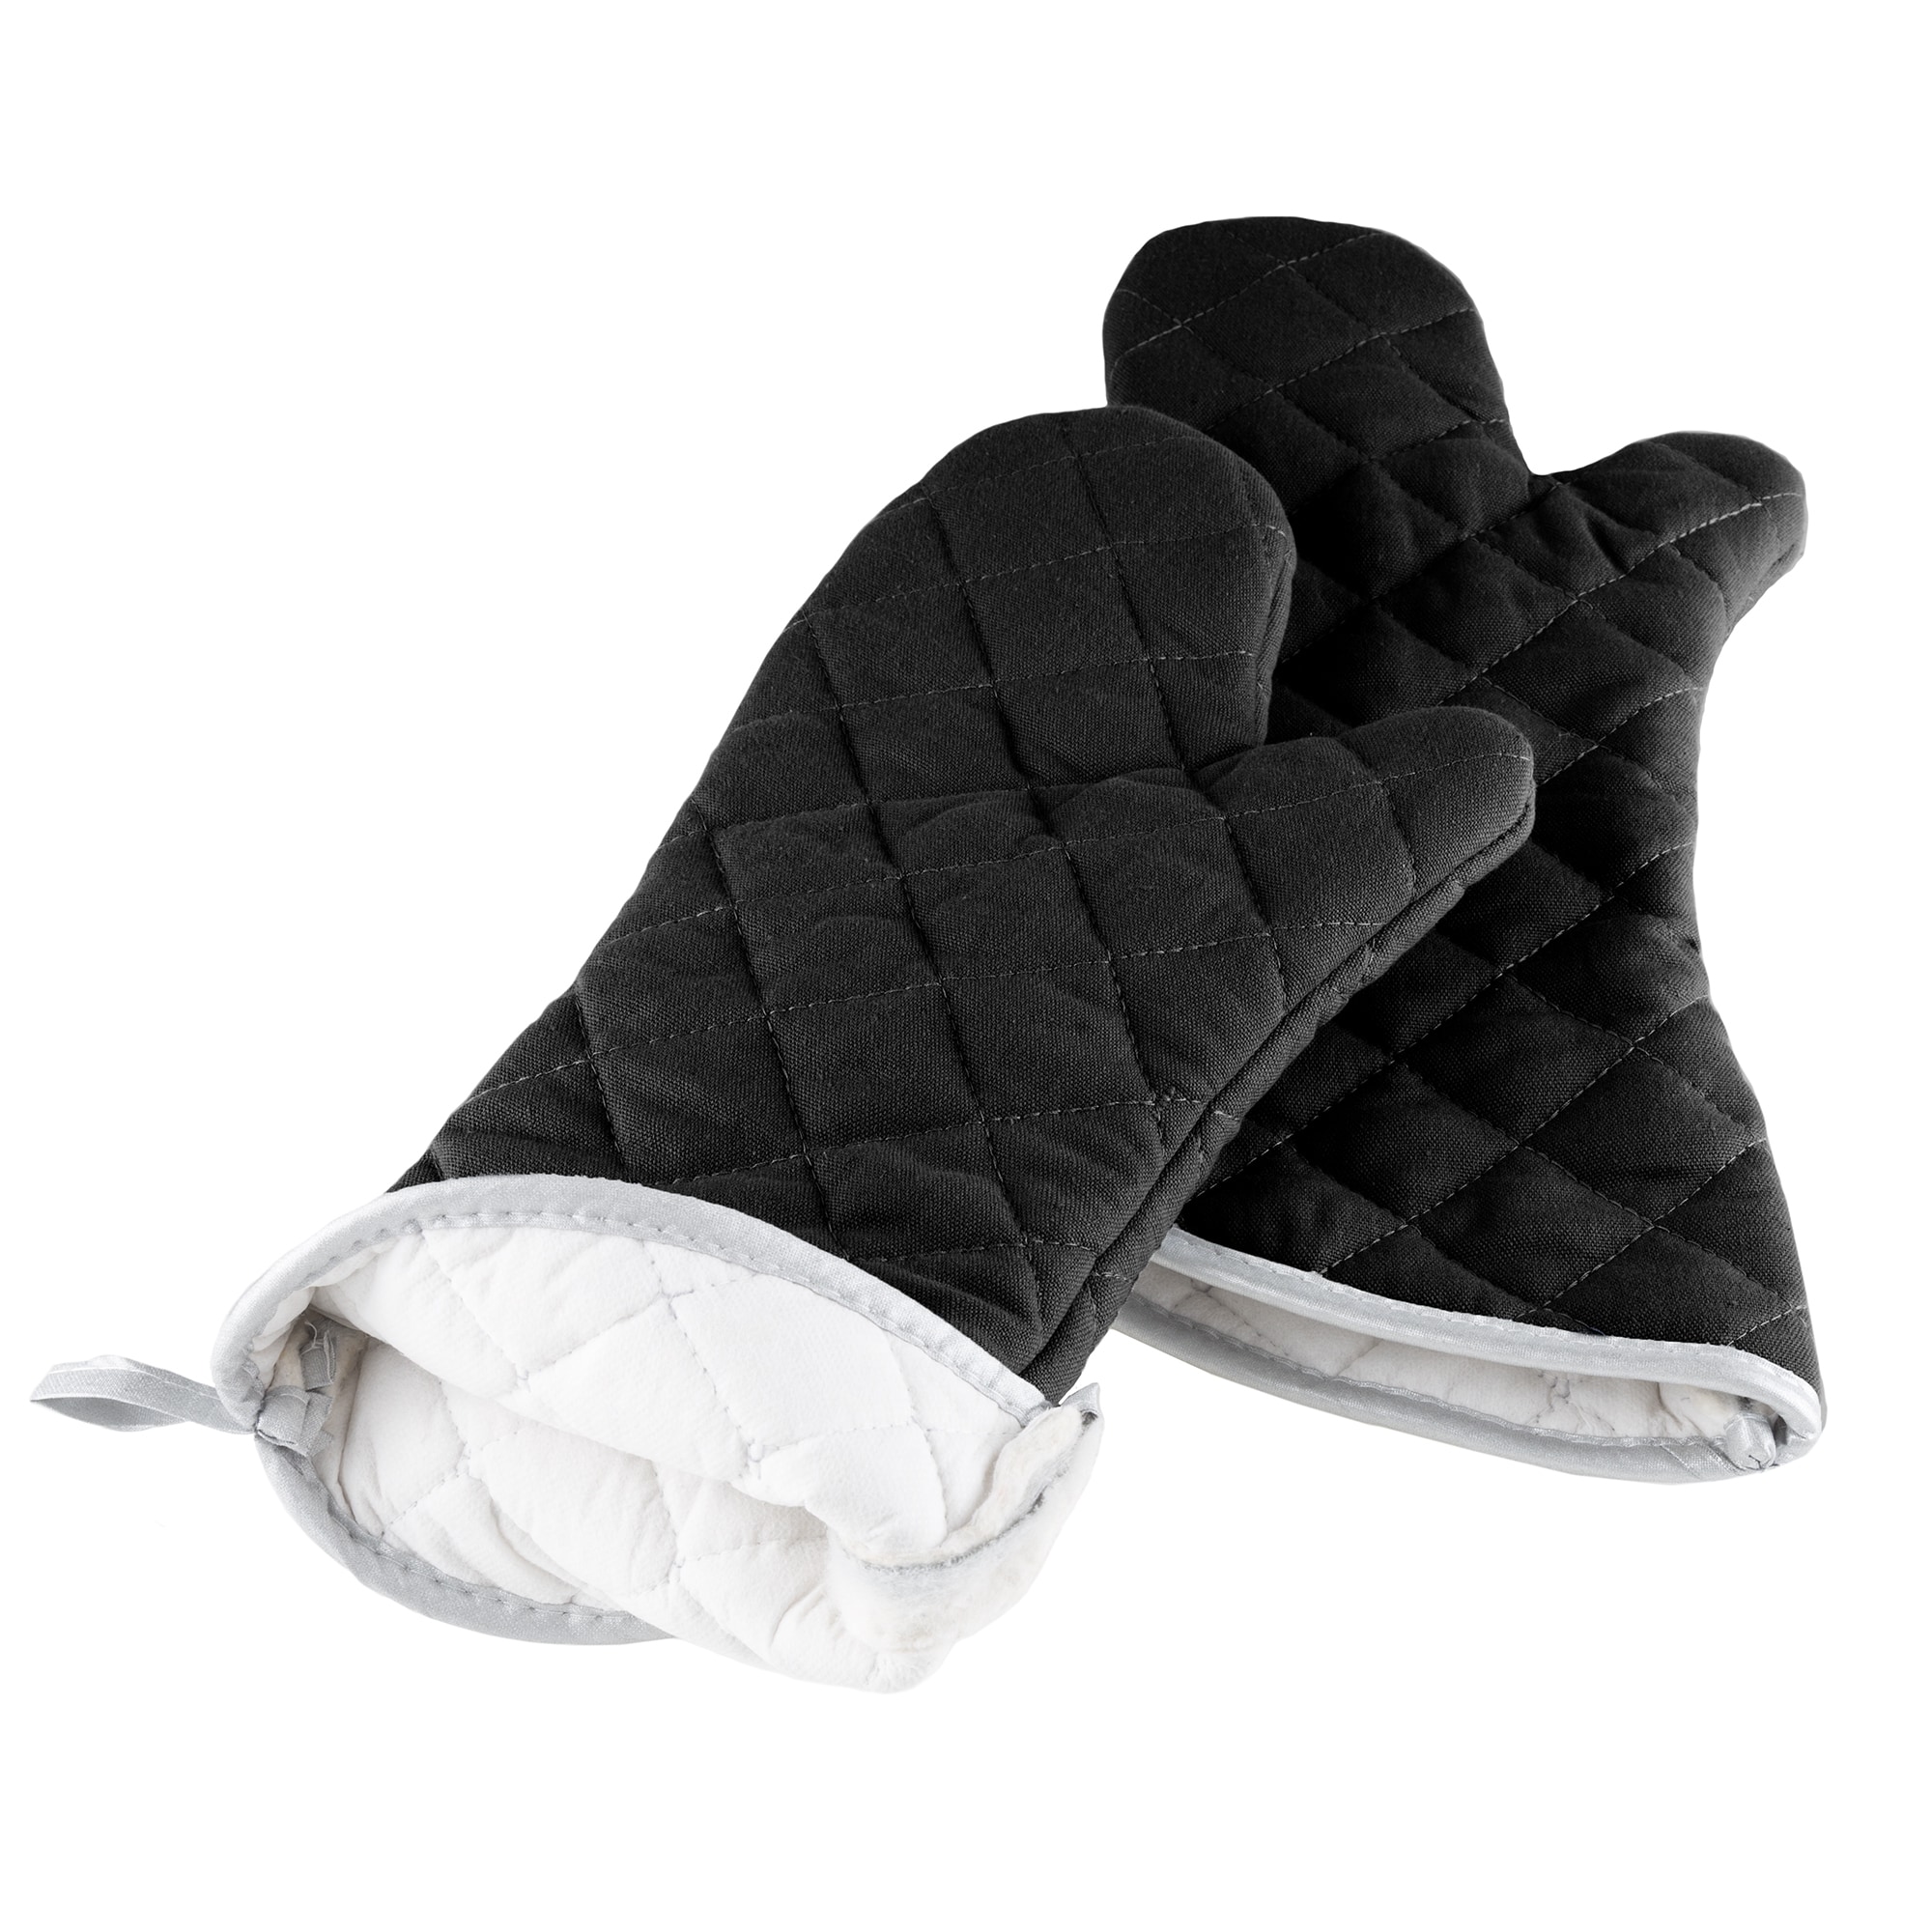 https://ak1.ostkcdn.com/images/products/15635839/Oven-Mitts-Set-of-2-Oversized-Quilted-Mittens-Flame-and-Heat-Resistant-By-Windsor-Home-a321410c-8143-48ce-9dc3-0e4db84b8e8d.jpg